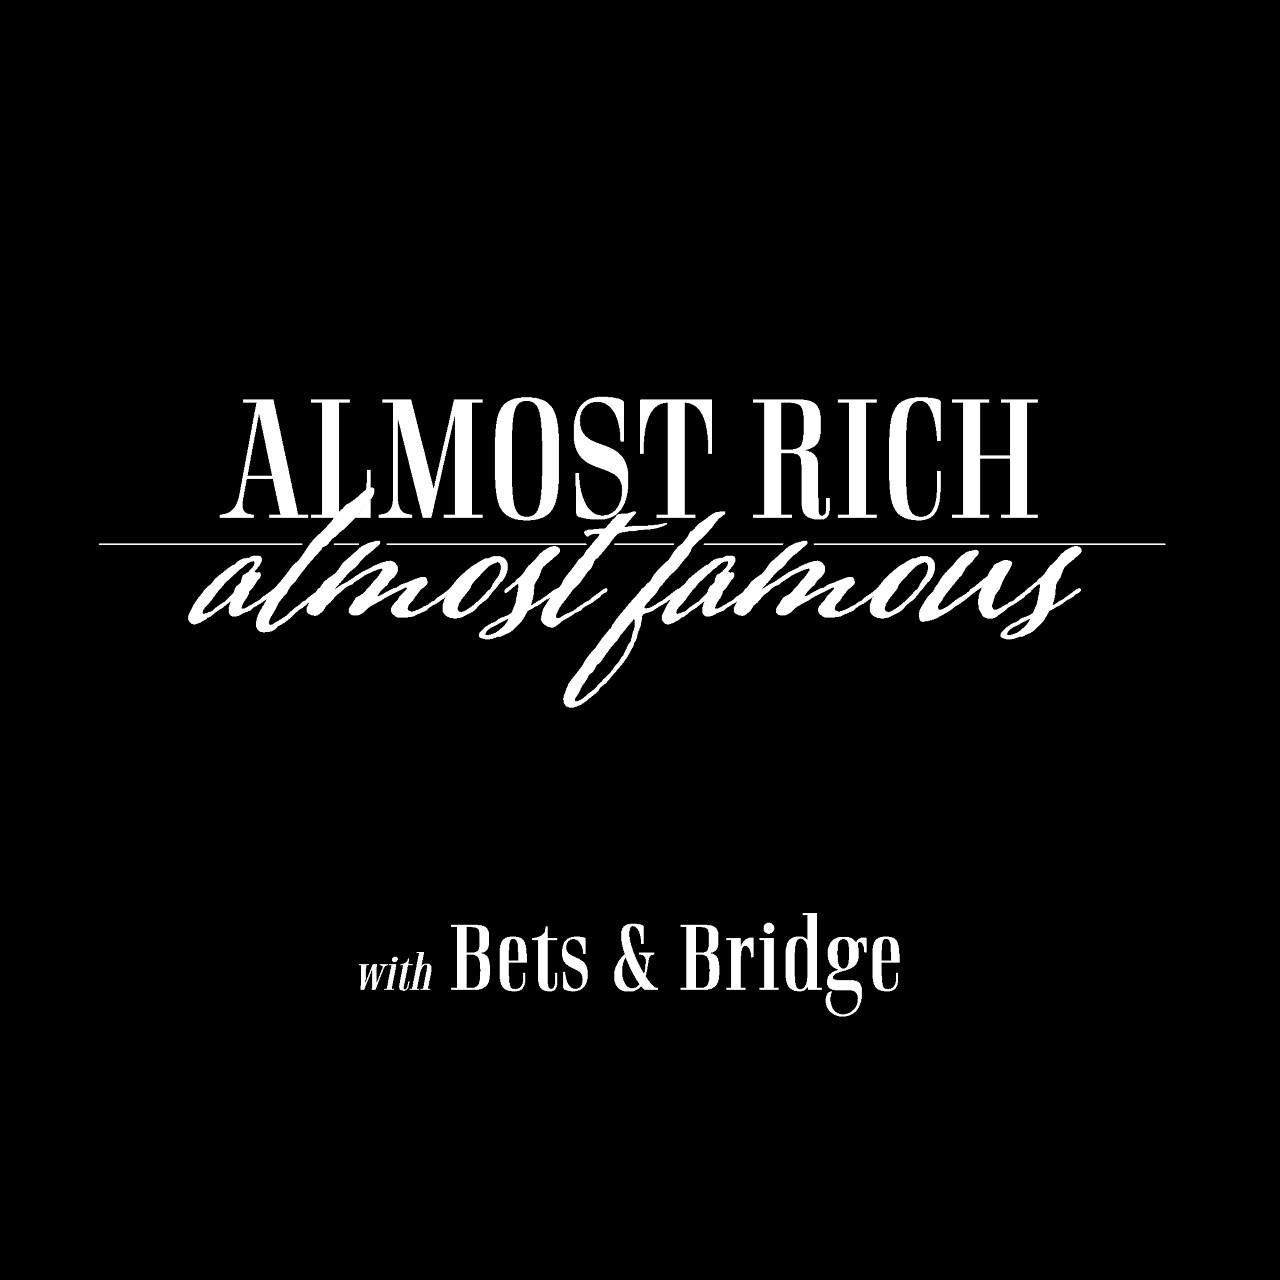 Almost Rich Almost Famous